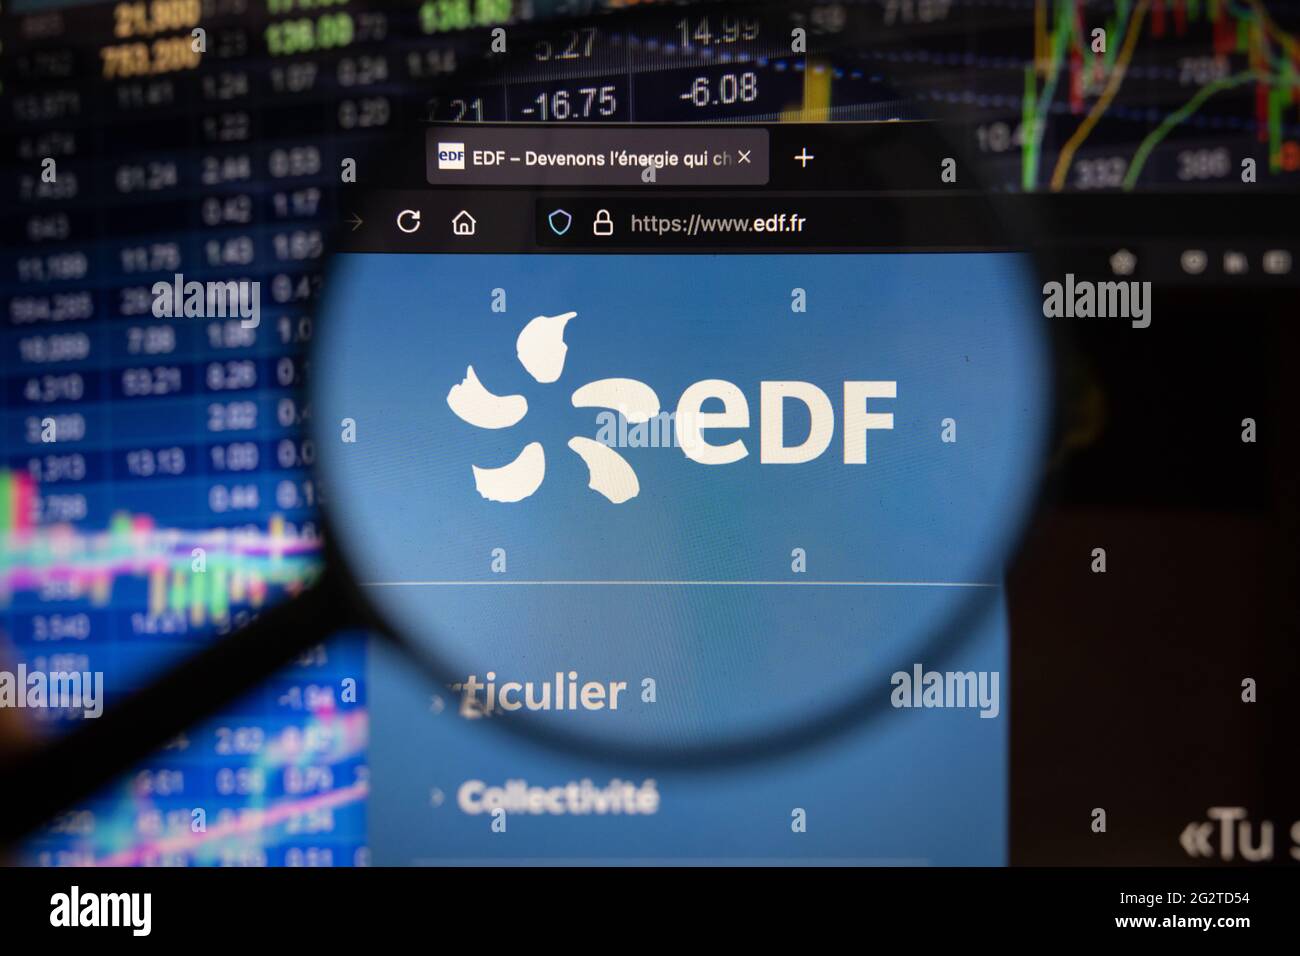 EDF company logo on a website with blurry stock market developments in the background, seen on a computer screen through a magnifying glass Stock Photo